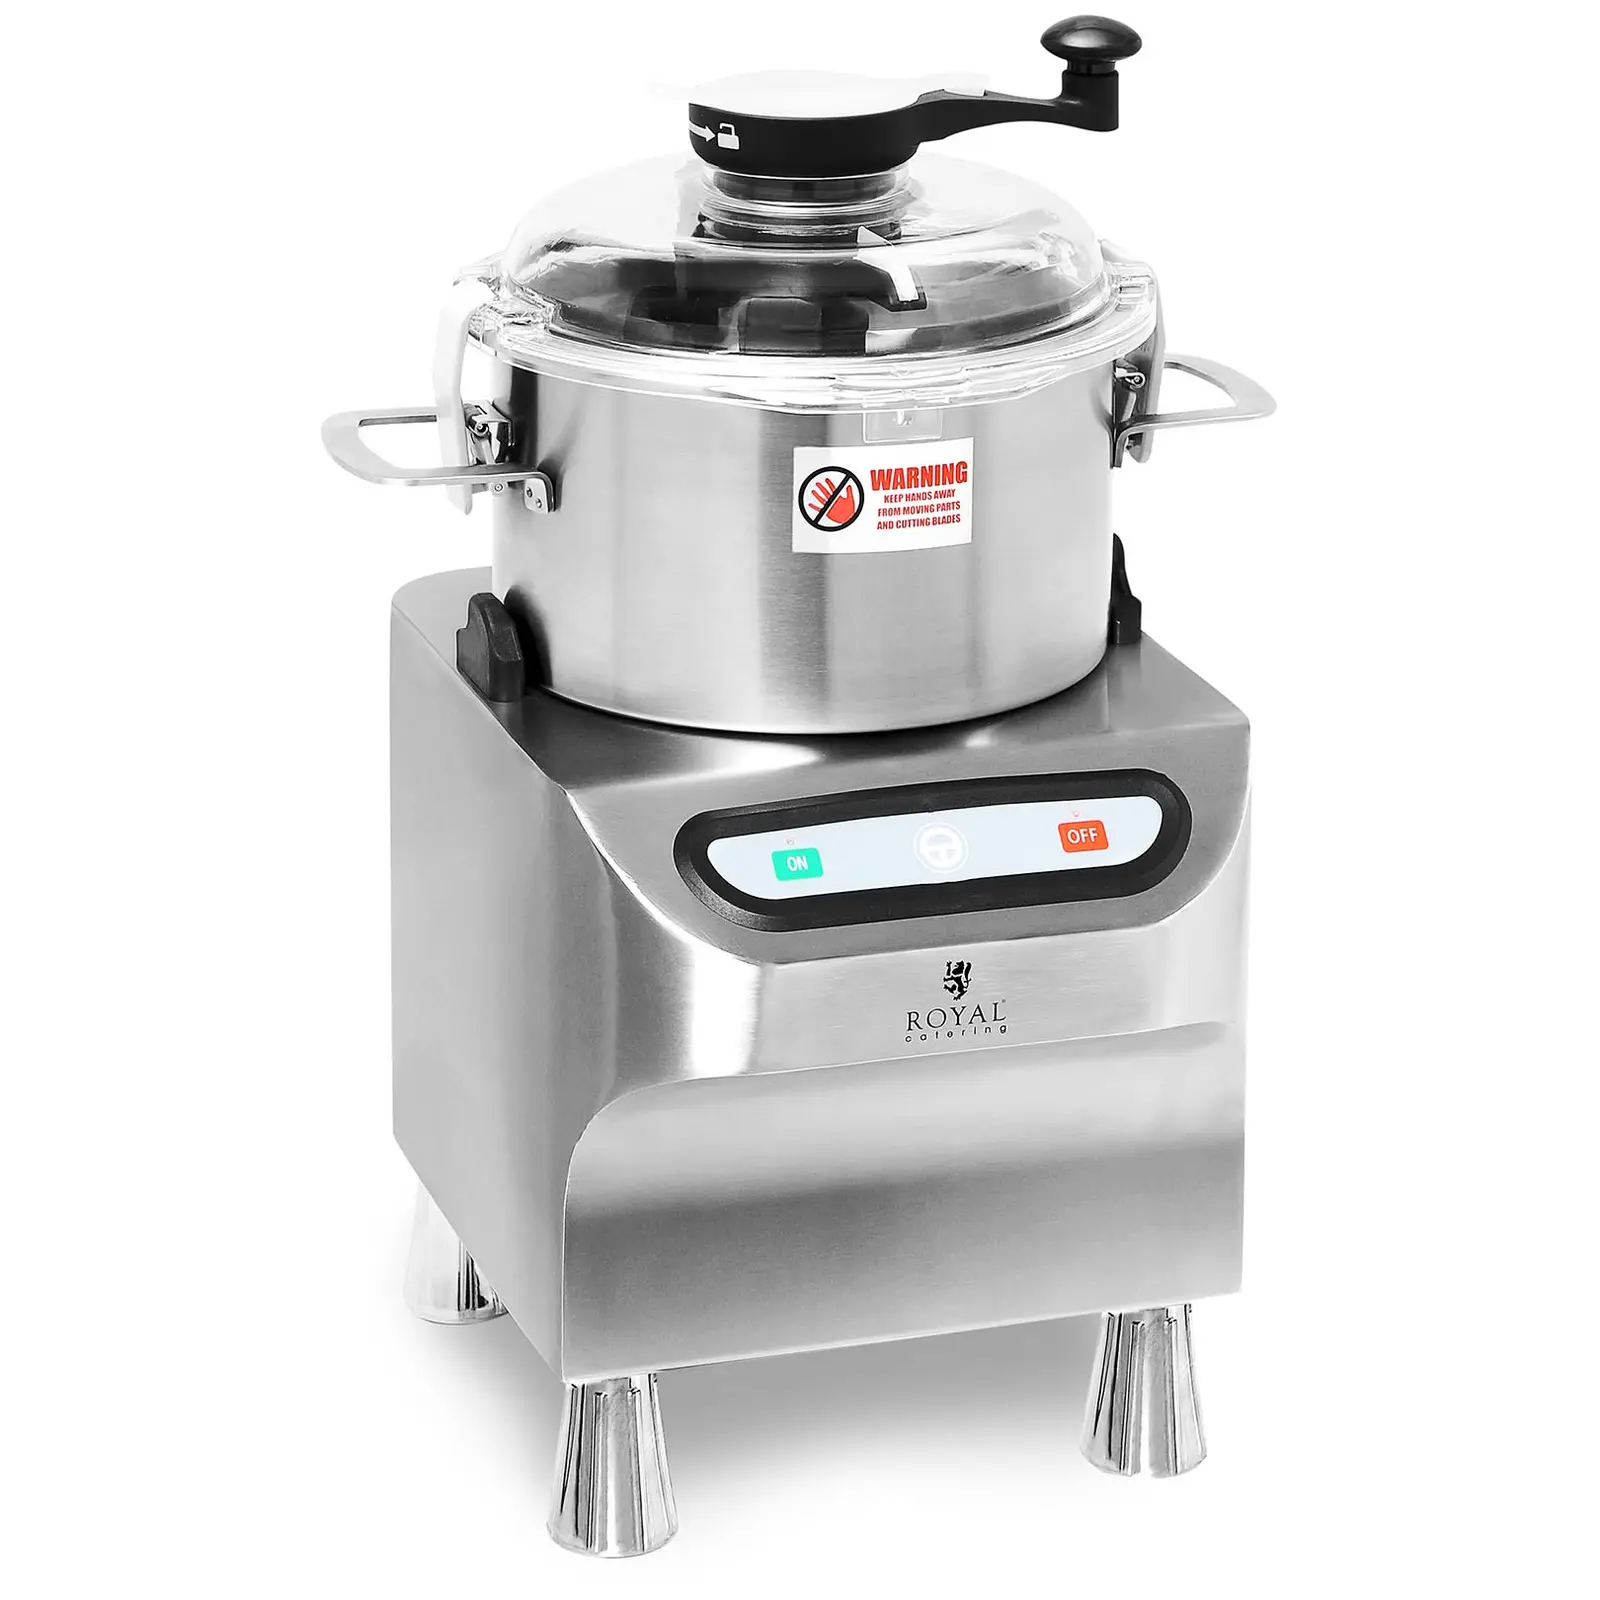 Occasion Cutter cuisine - 1500 tr/min - Royal Catering - 5 l